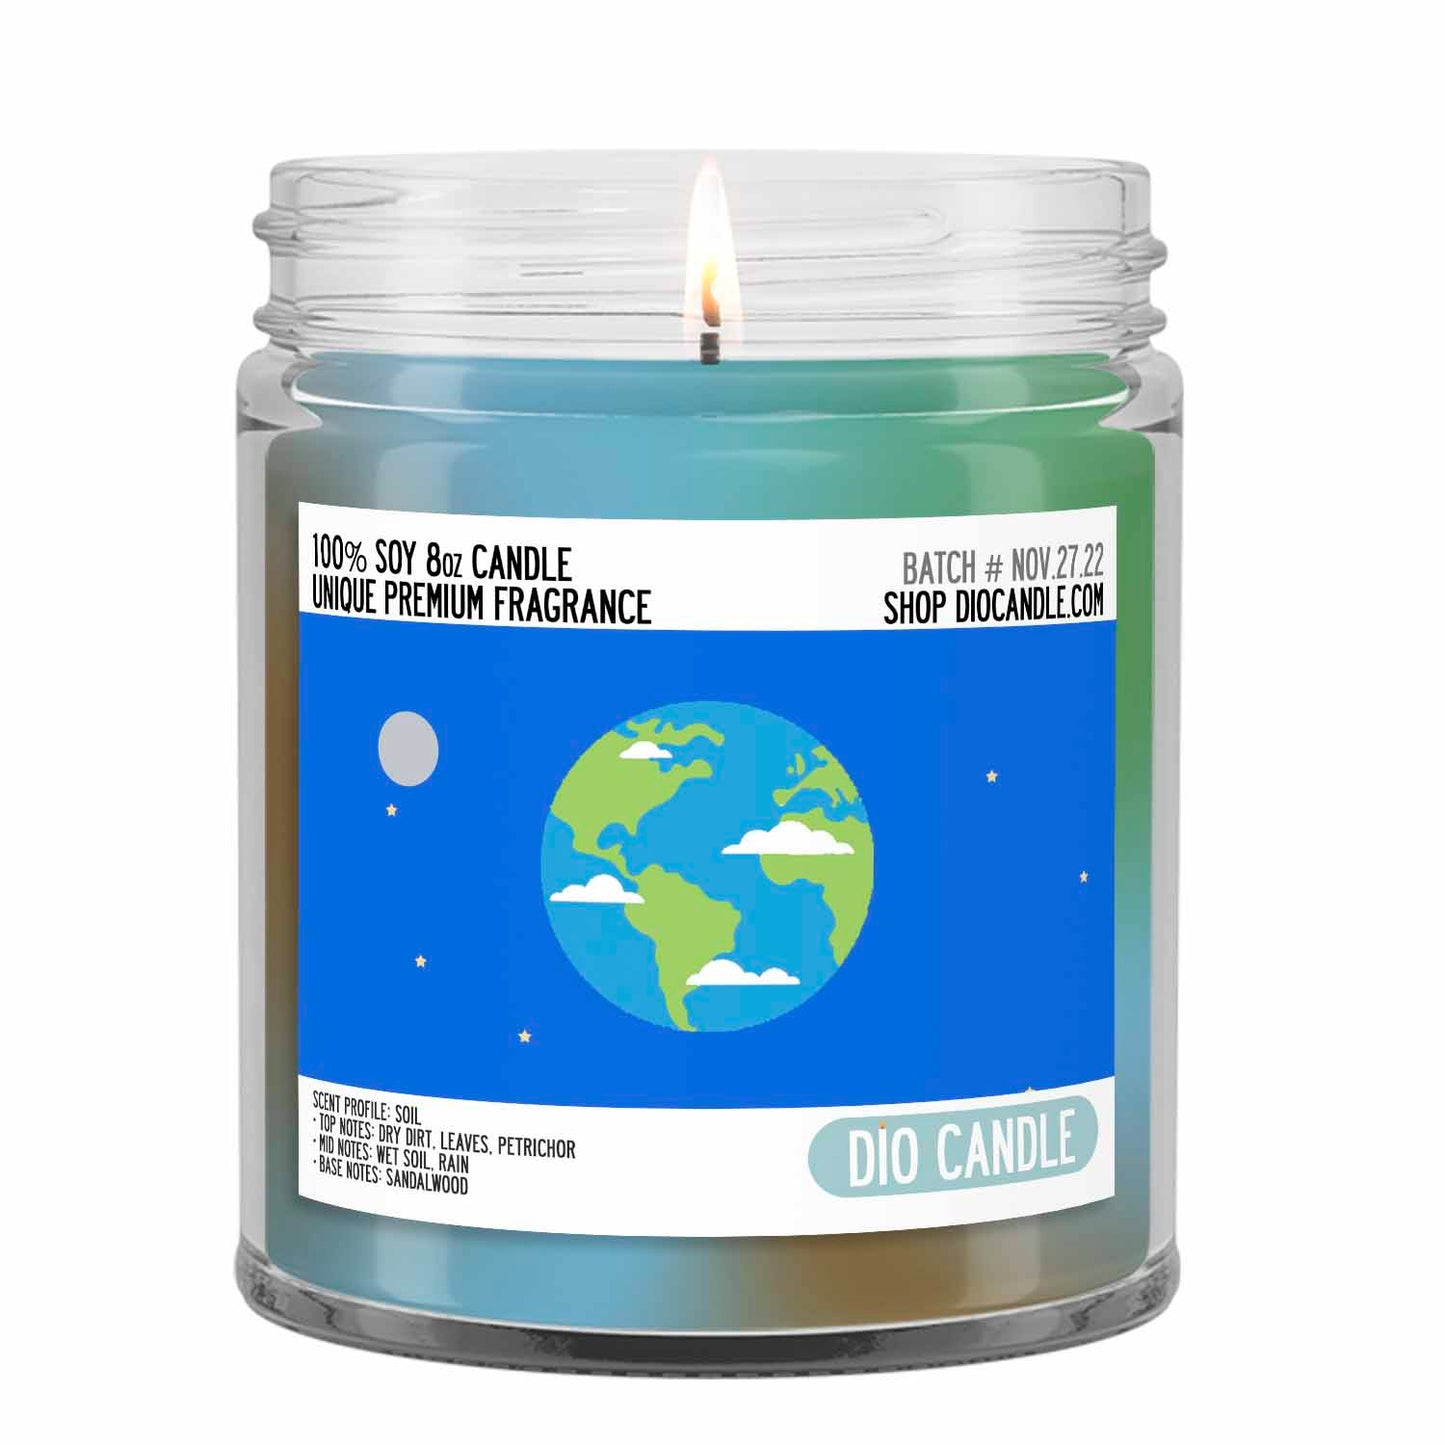 Planet Earth Candle